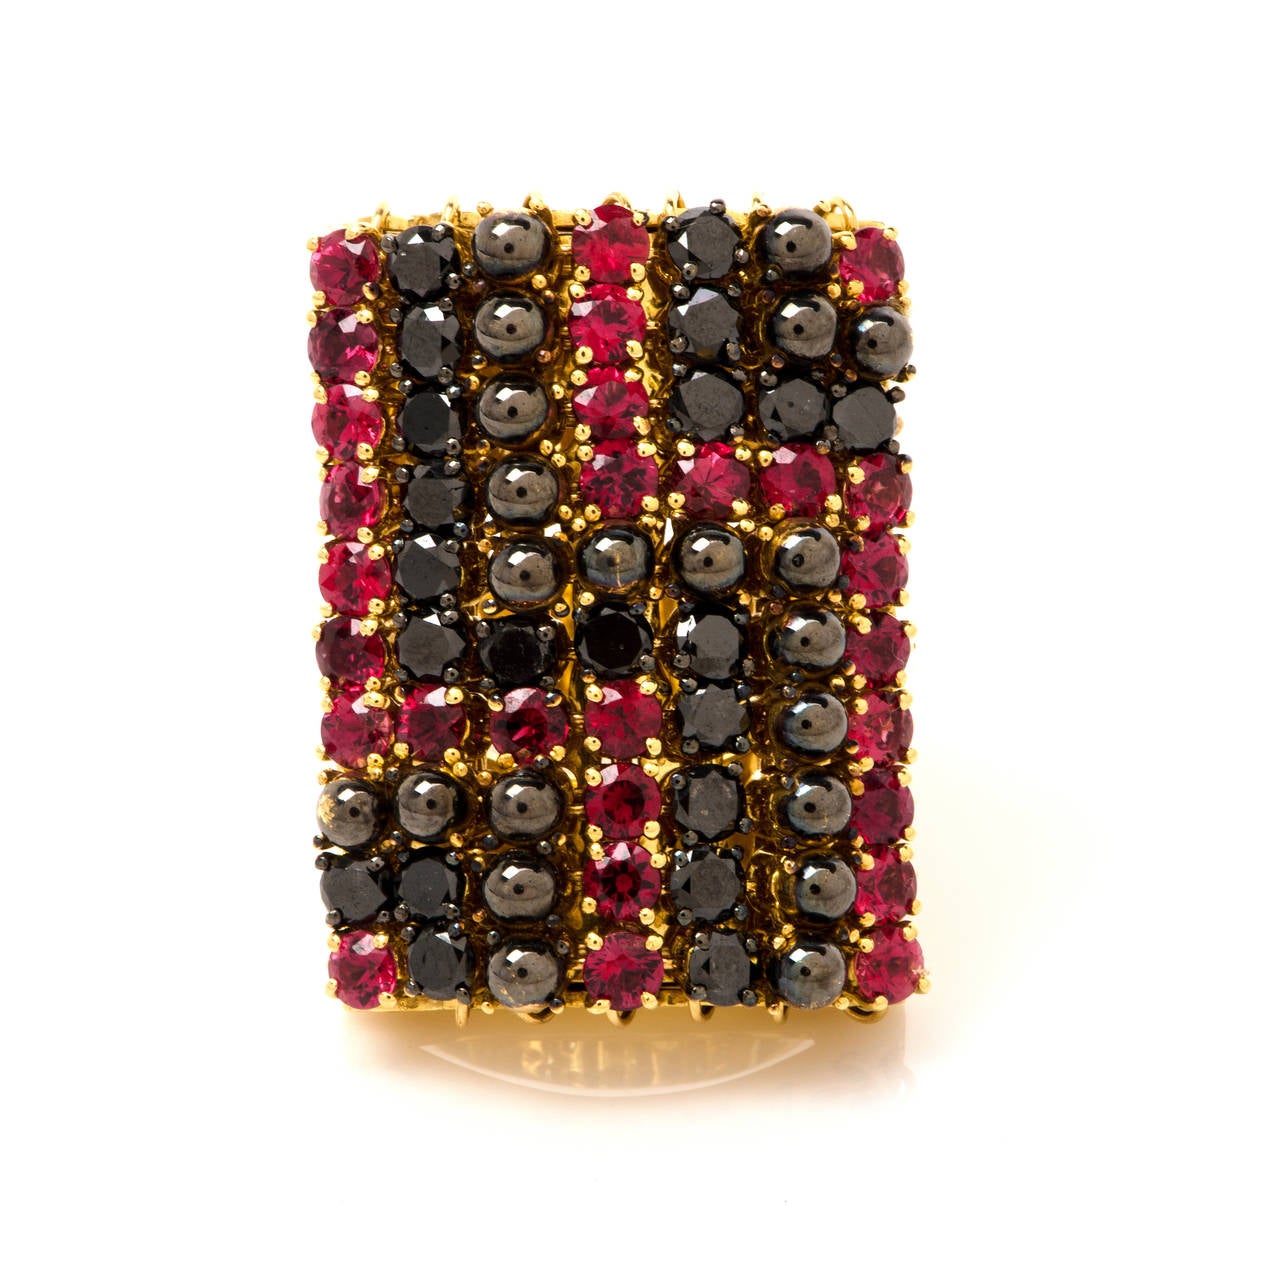 This majestic and very fashionable GARAVELLI ring is crafted in solid 18K yellow gold. This ring is centered with 21 genuine black diamonds approx 3.00cttw, some 28 genuine red sapphires approx 3.75cttw and some 21 genuine solid gold beads covered